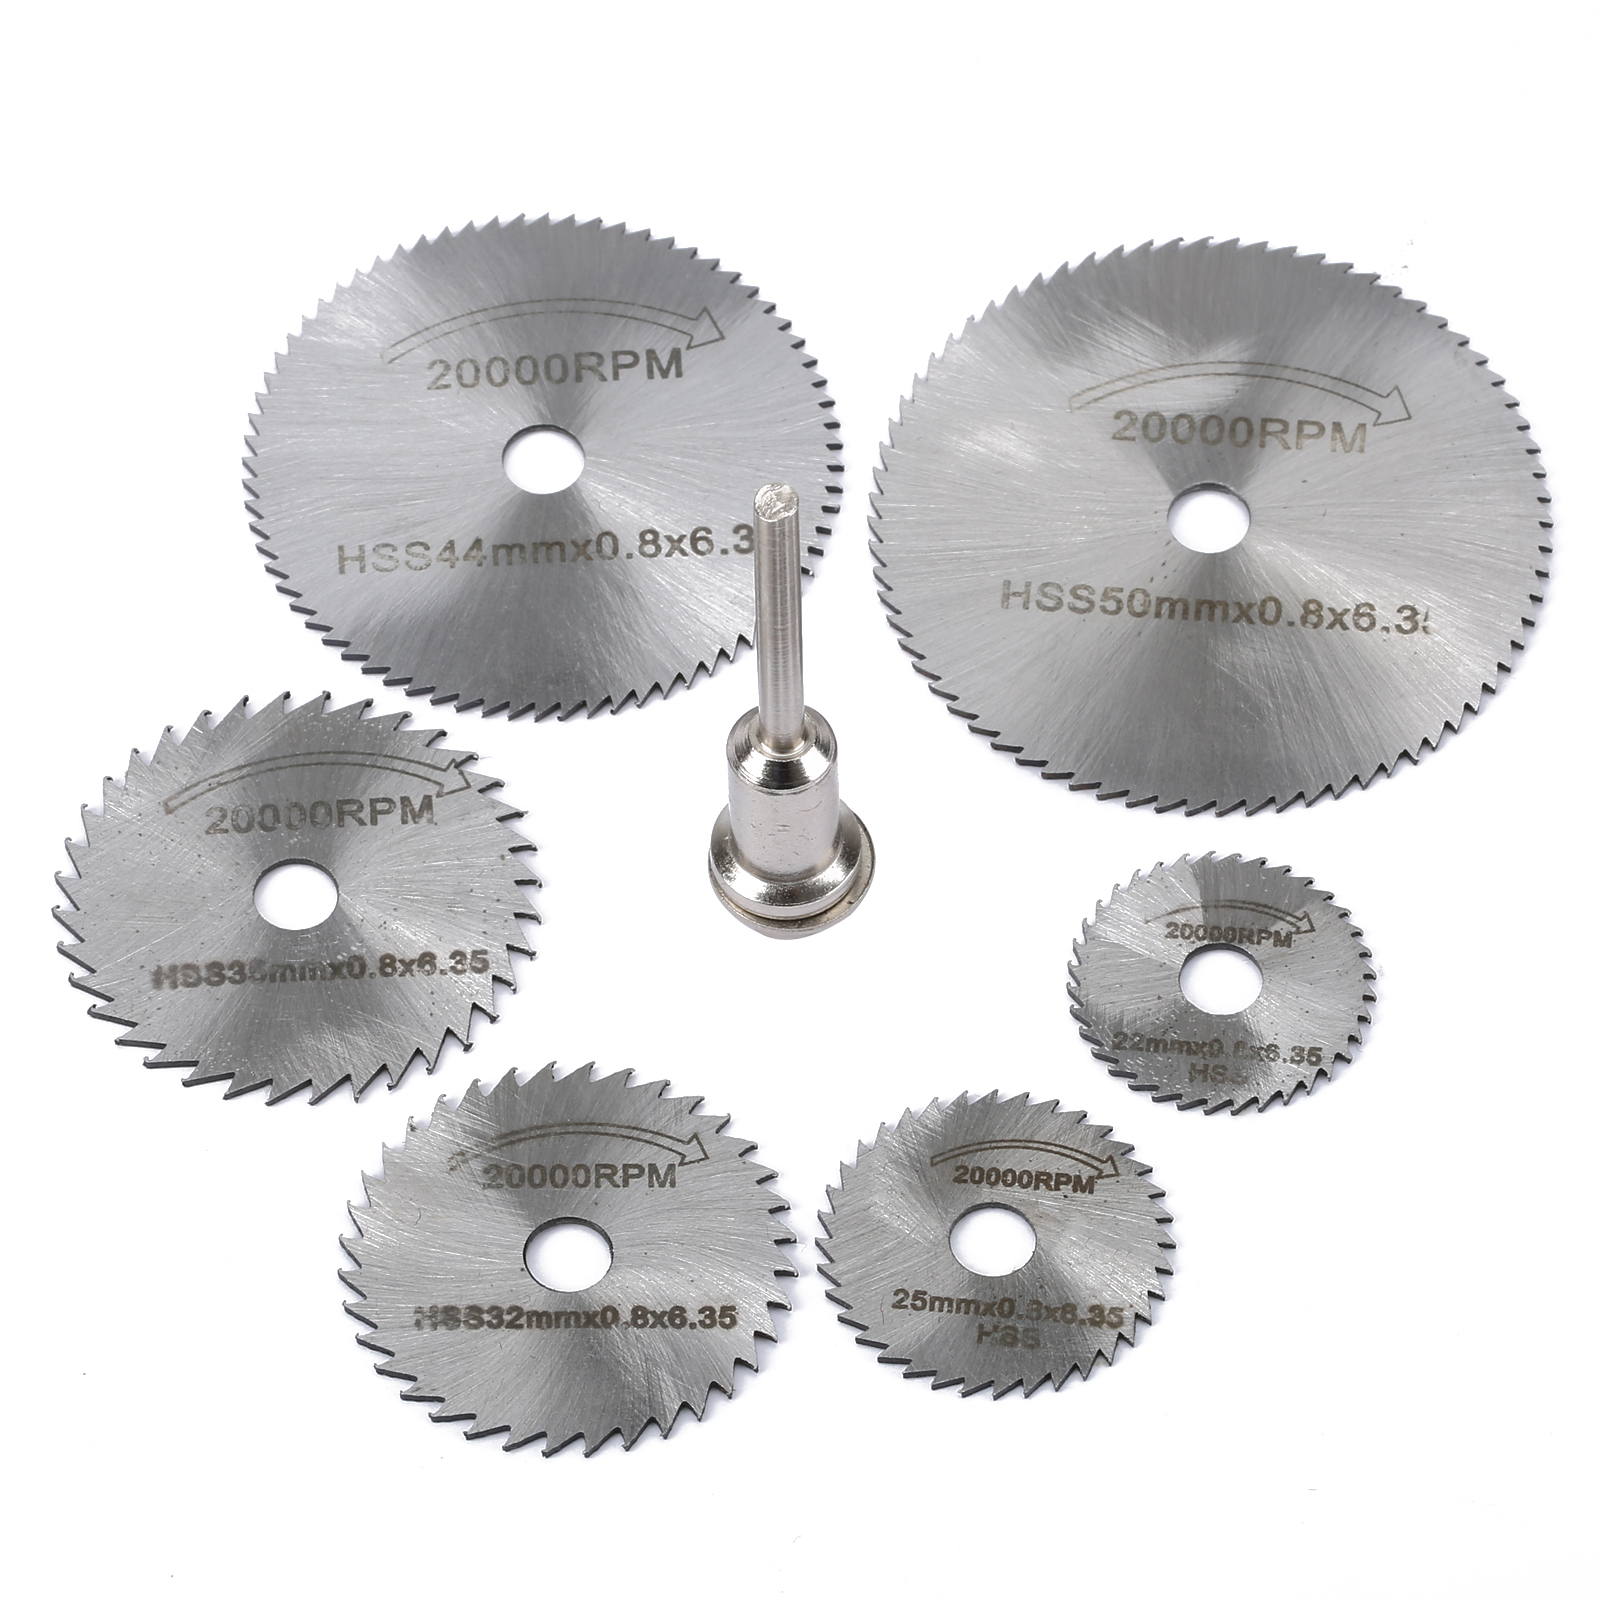 7pcs/Set 30mm Mini Diamond Saw Blade Silver Cutting Discs With 2X Connecting Shank For Dremel Drill Fit Rotary Tool